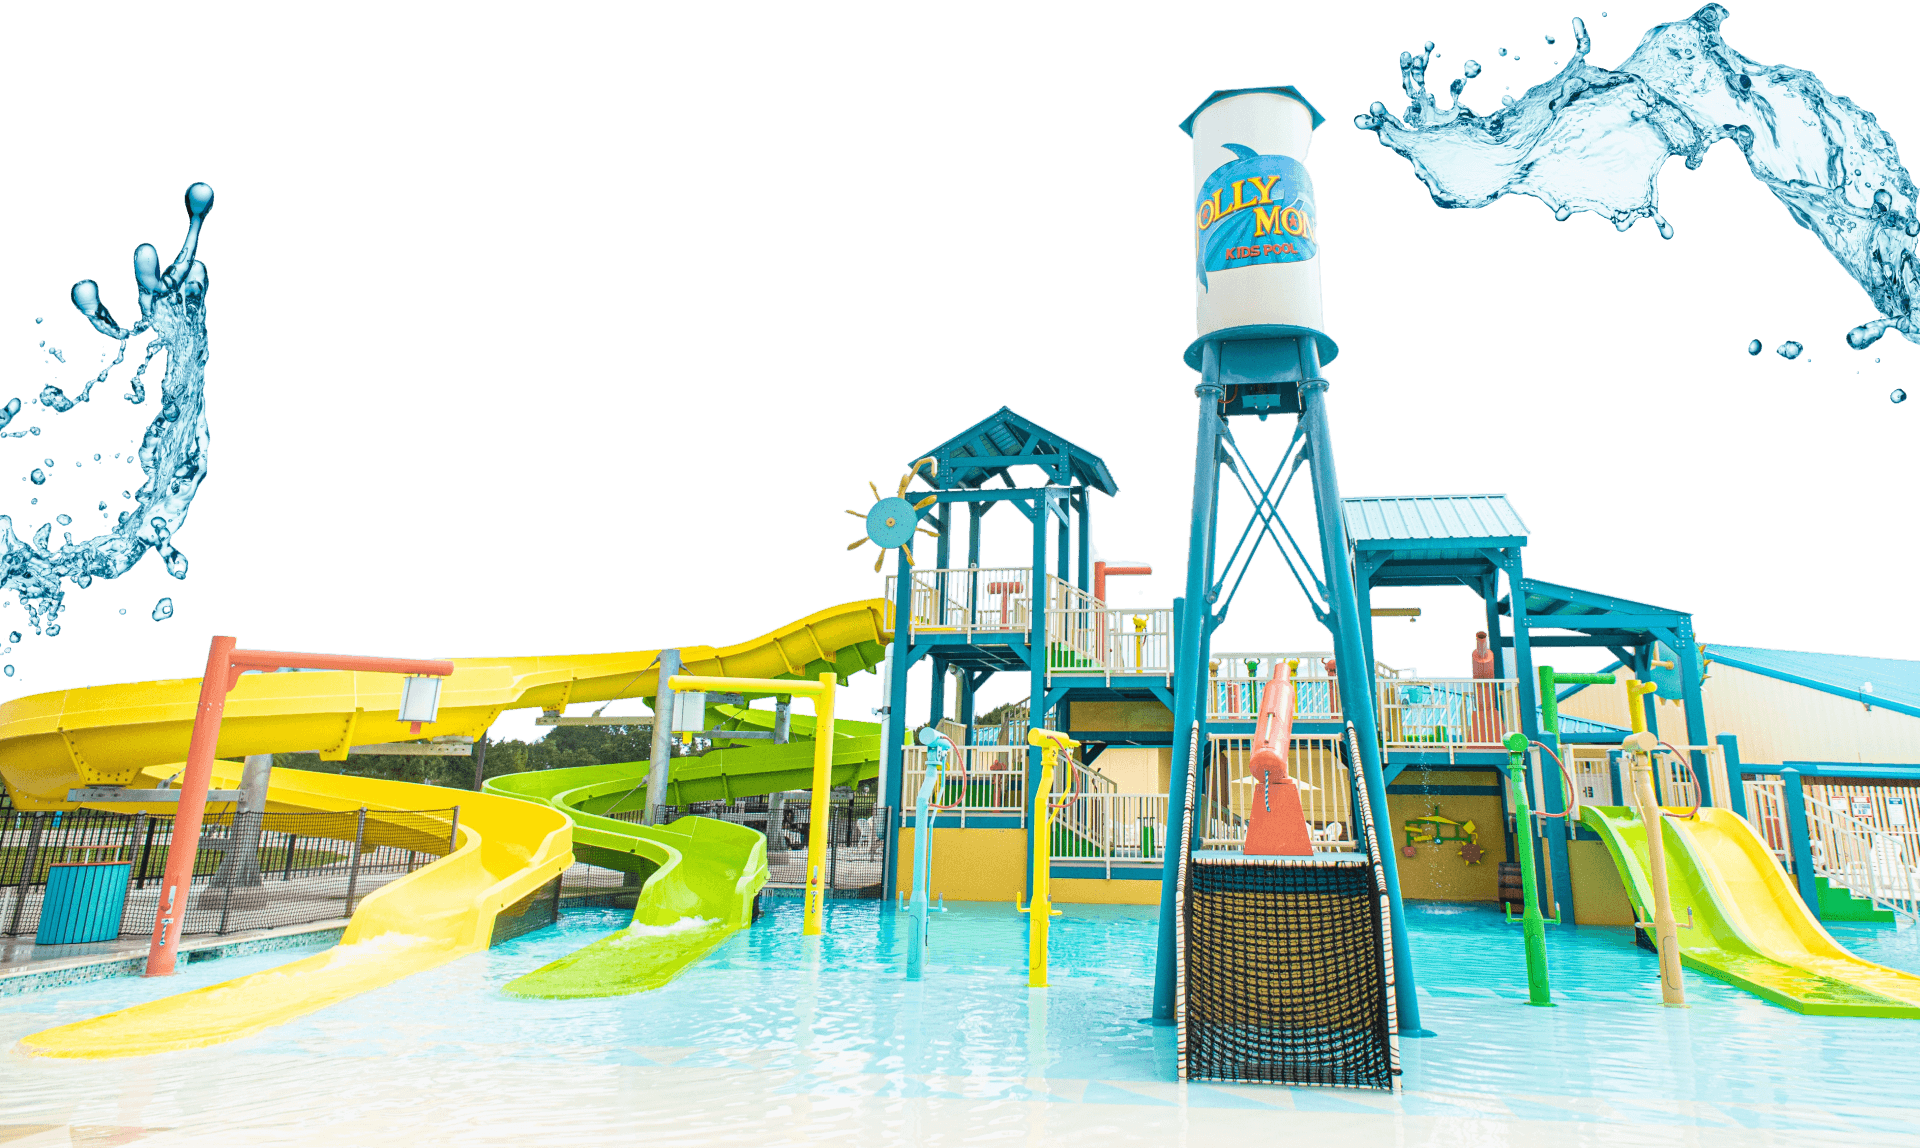 Image of a water park structure